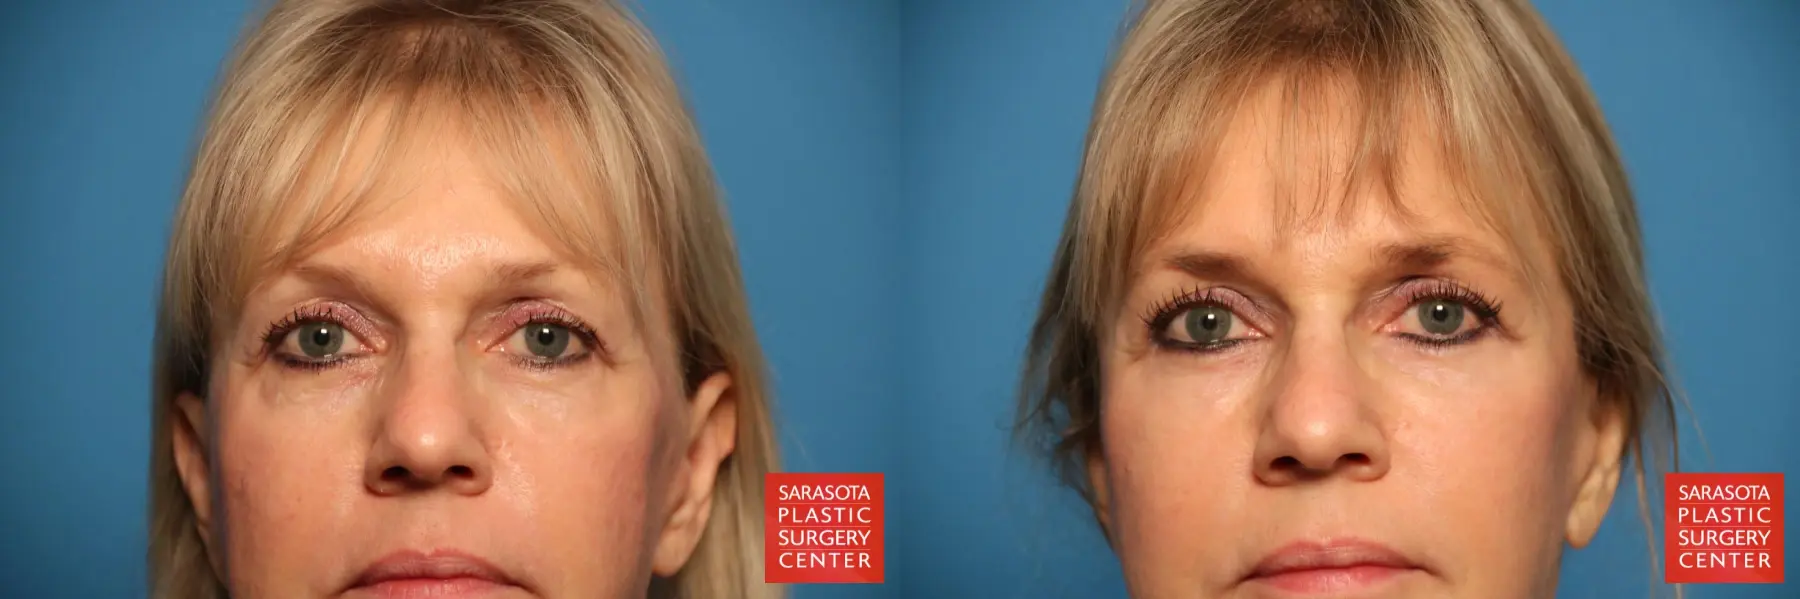 Eyelid Lift: Patient 7 - Before and After 1